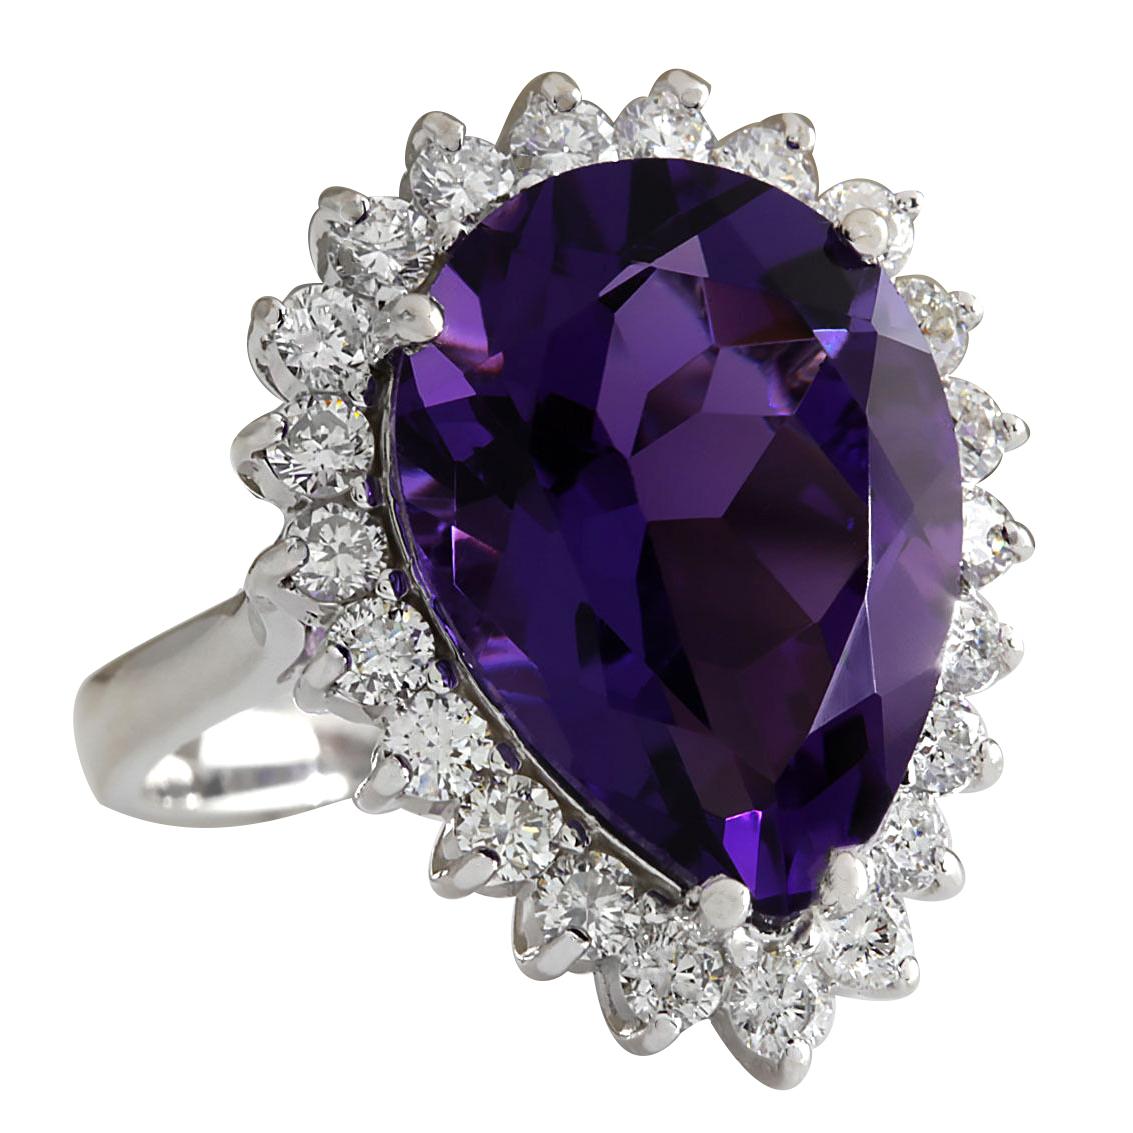 Stamped: 18K White Gold
Total Ring Weight: 7.5 Grams
Ring Length: N/A
Ring Width: N/A
Gemstone Weight: Total Natural Amethyst Weight is 9.54 Carat (Measures: 17.85x12.99 mm)
Color: Purple
Diamond Weight: Total Natural Diamond Weight is 1.26